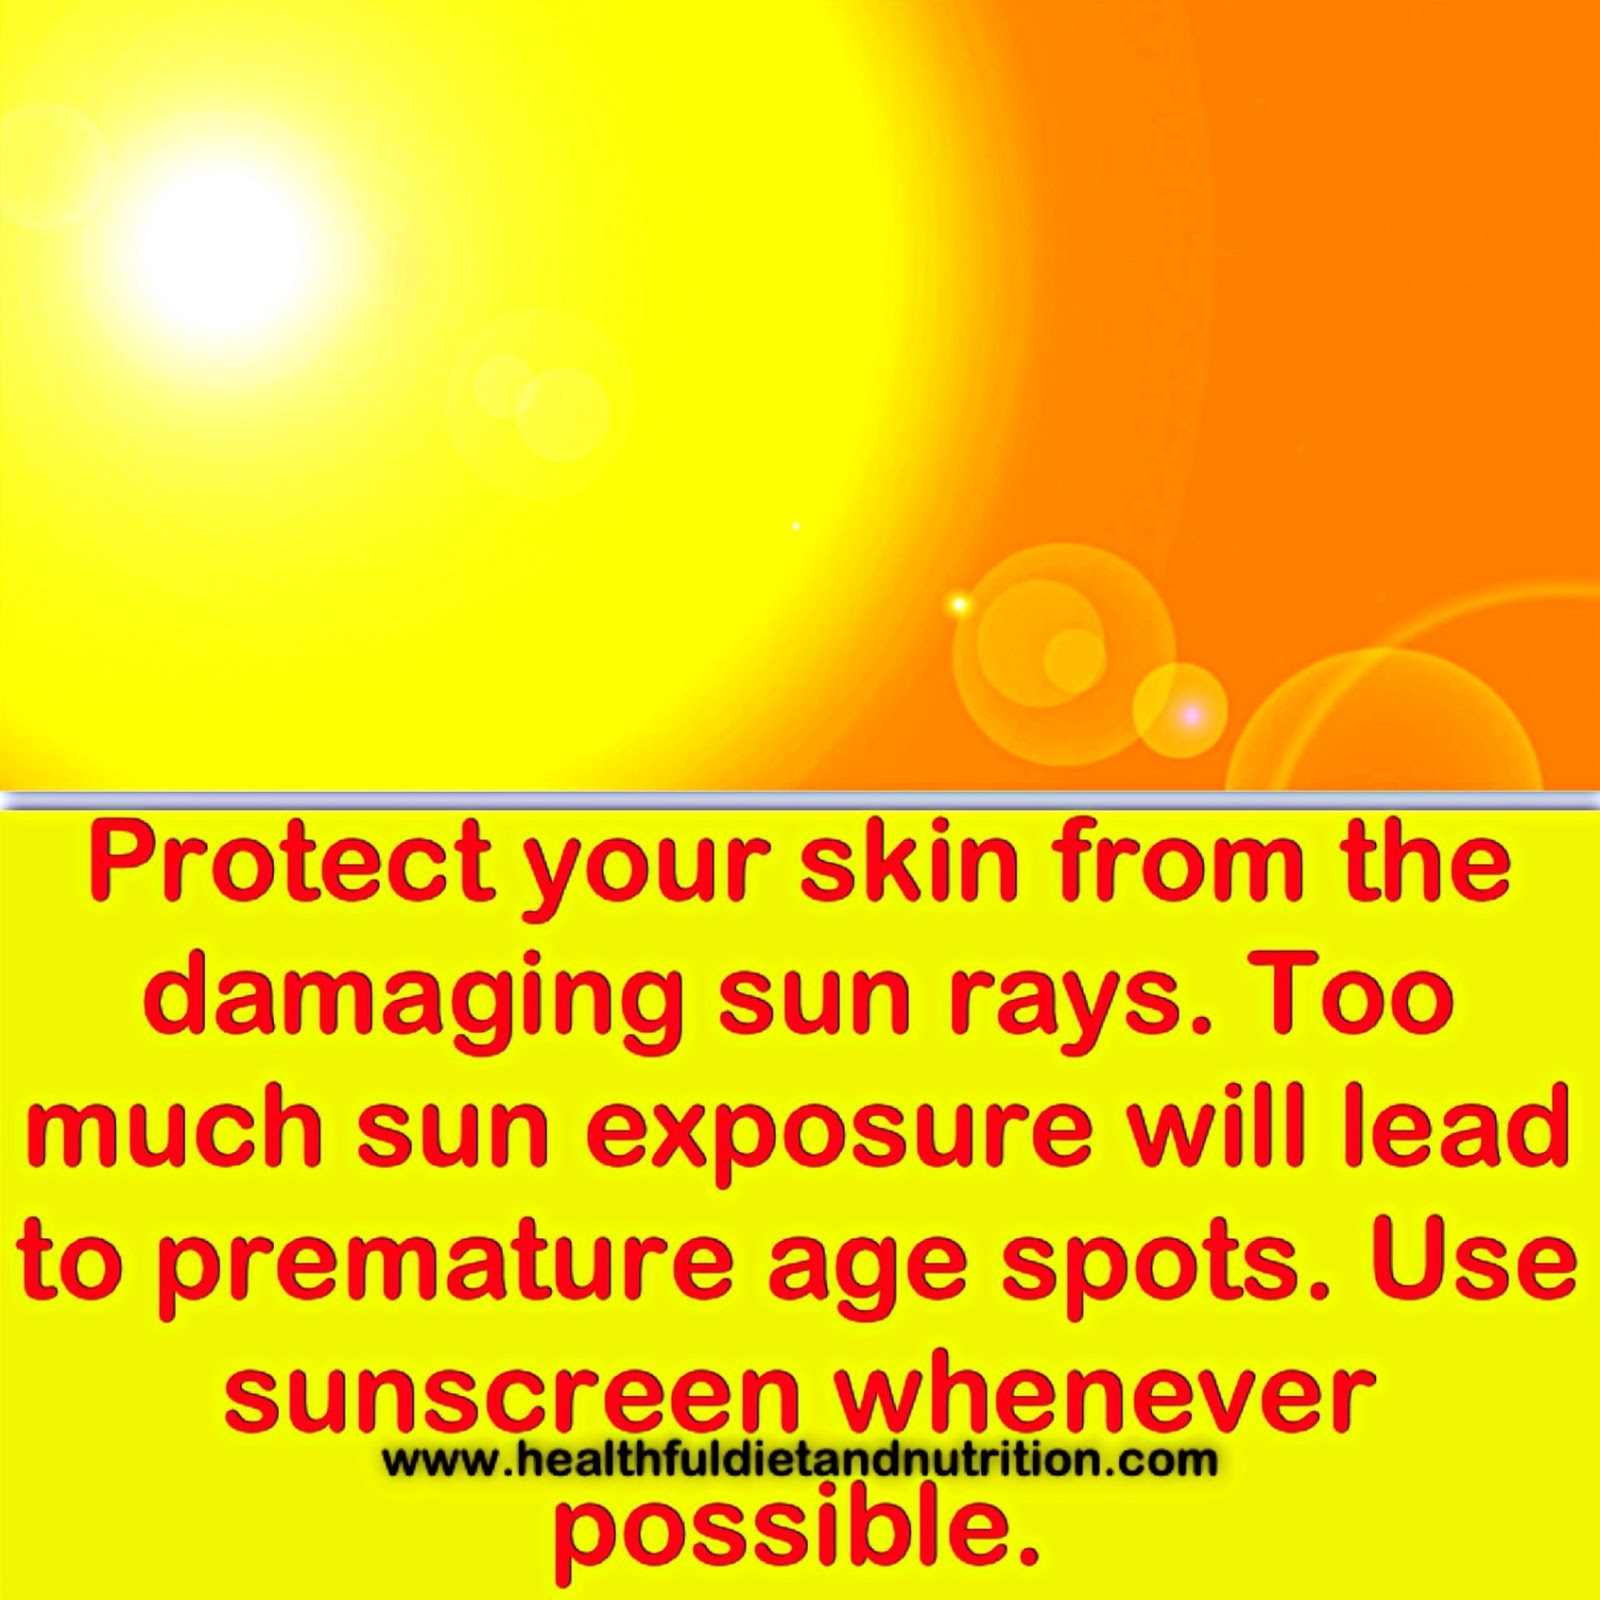 Protect Your Skin From the Sun